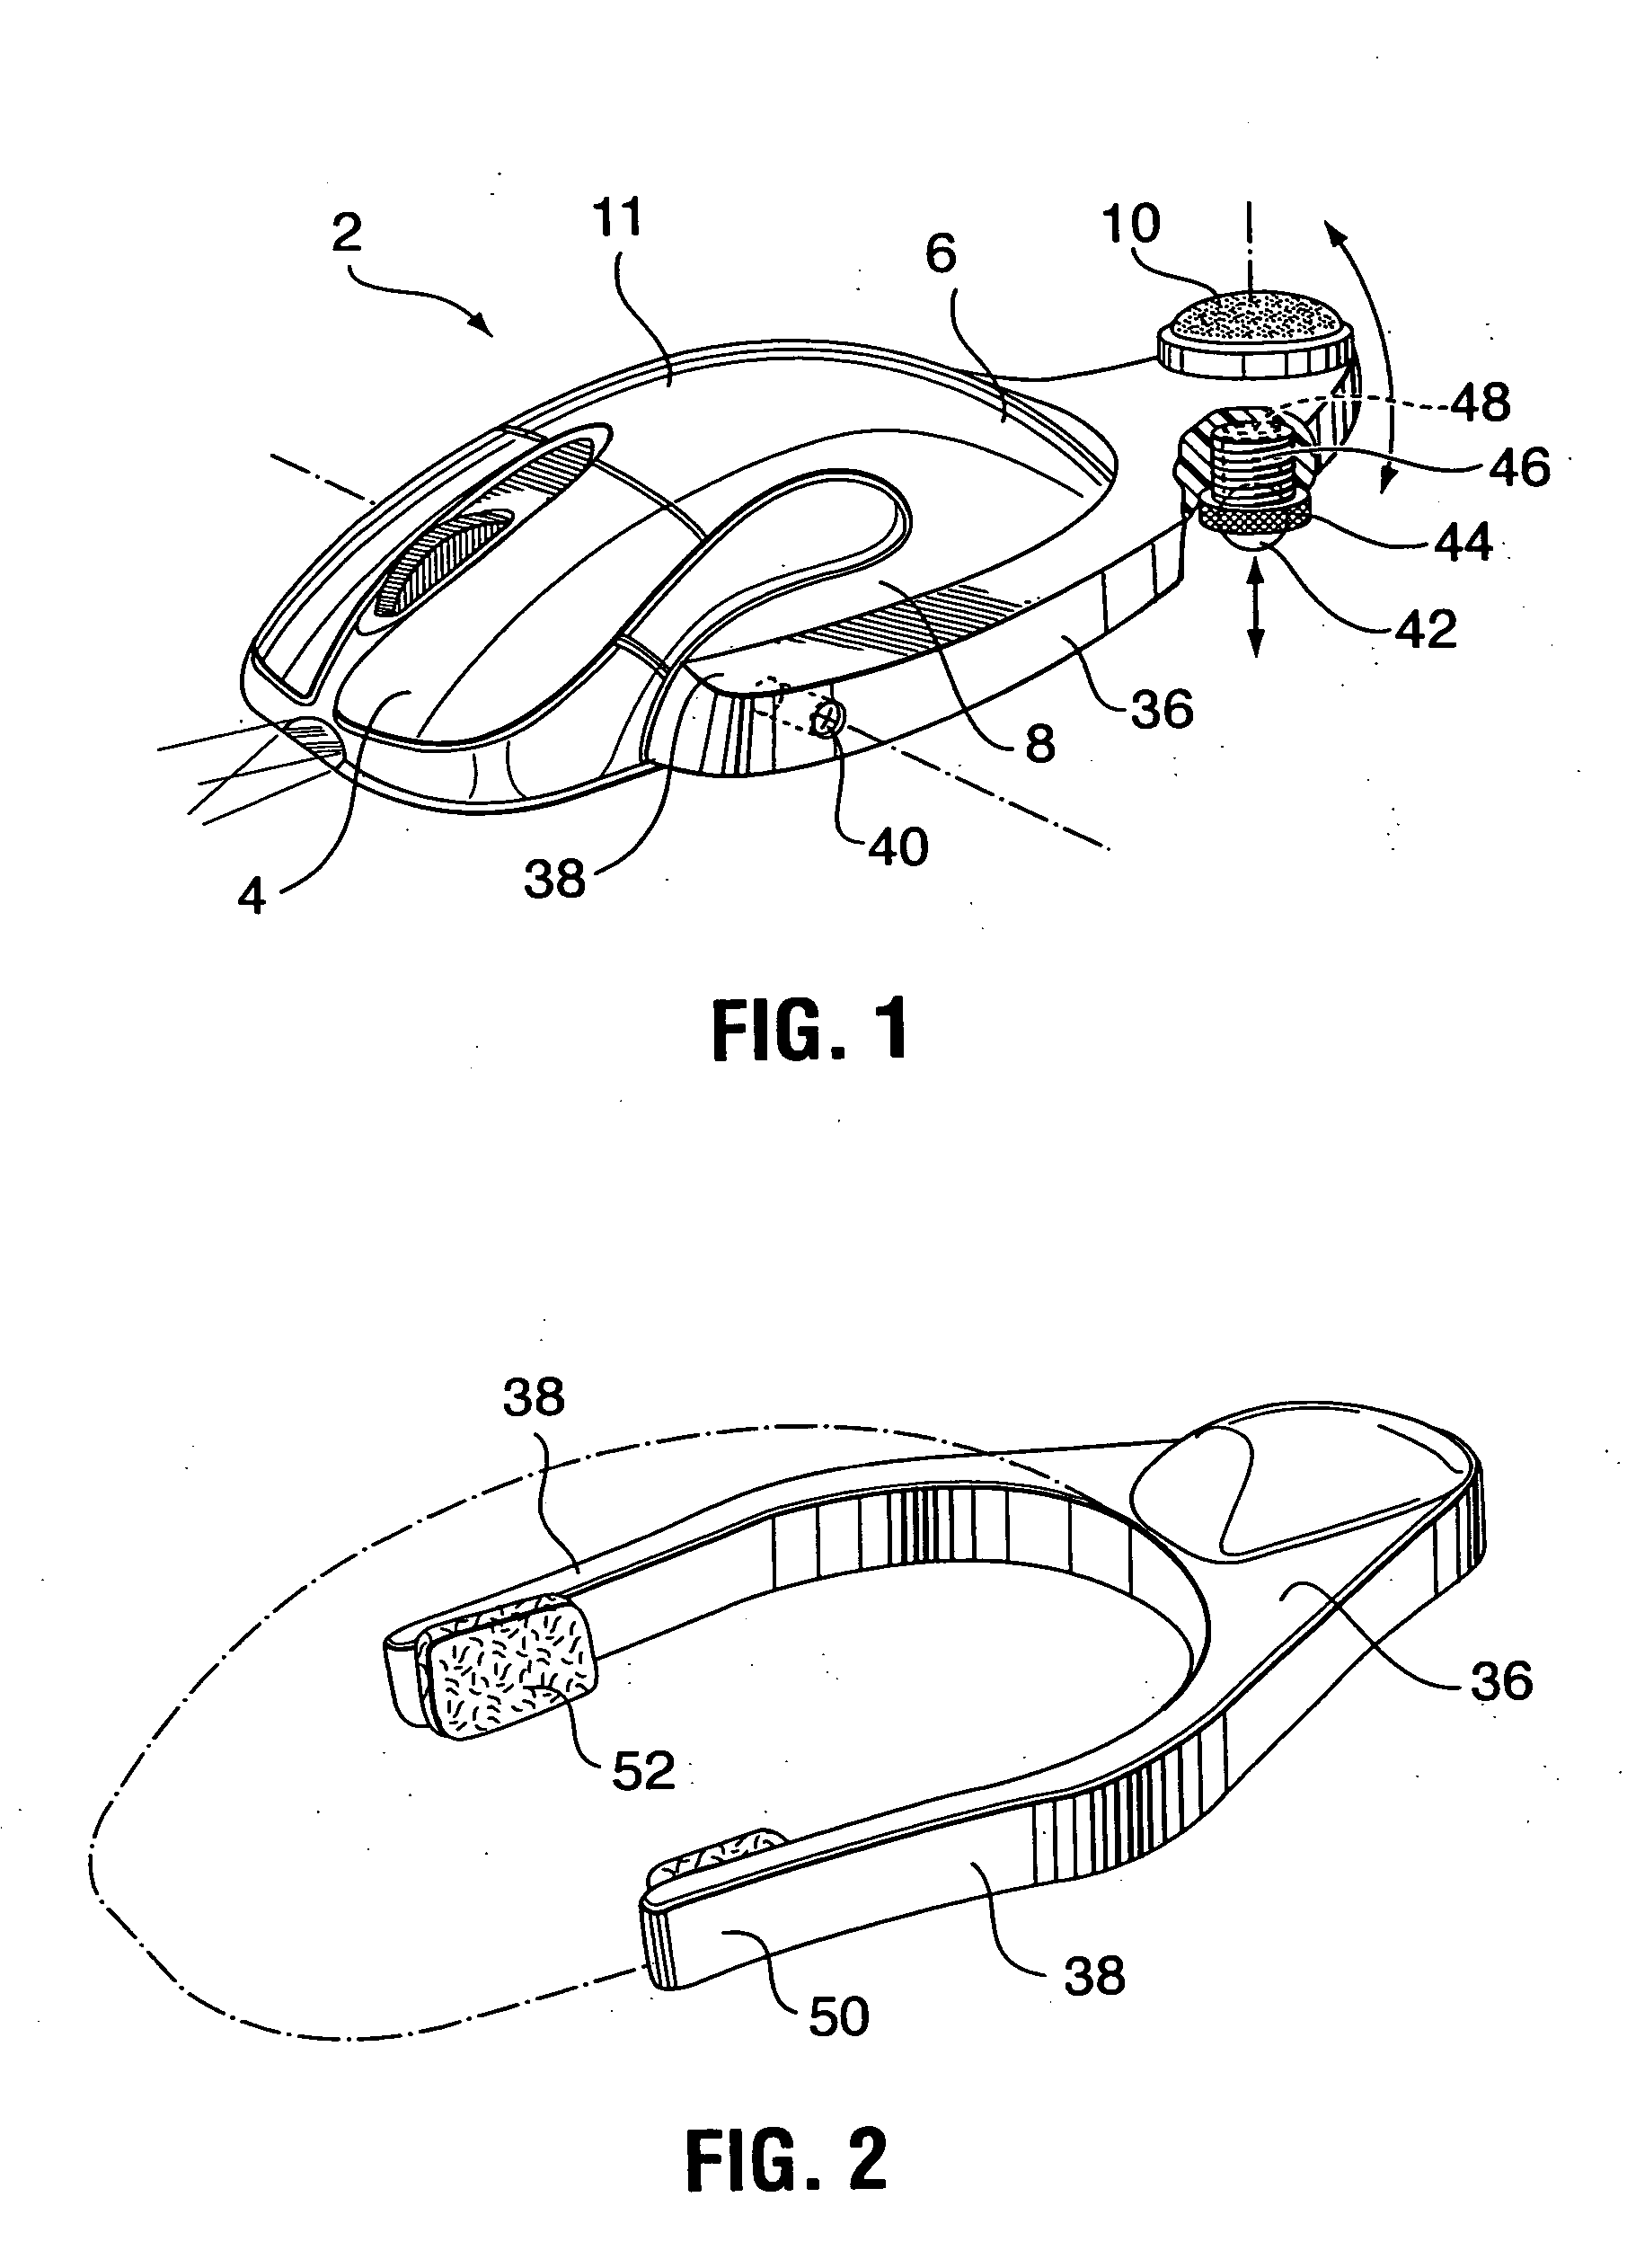 Adjustable hand positioner for computer mouse